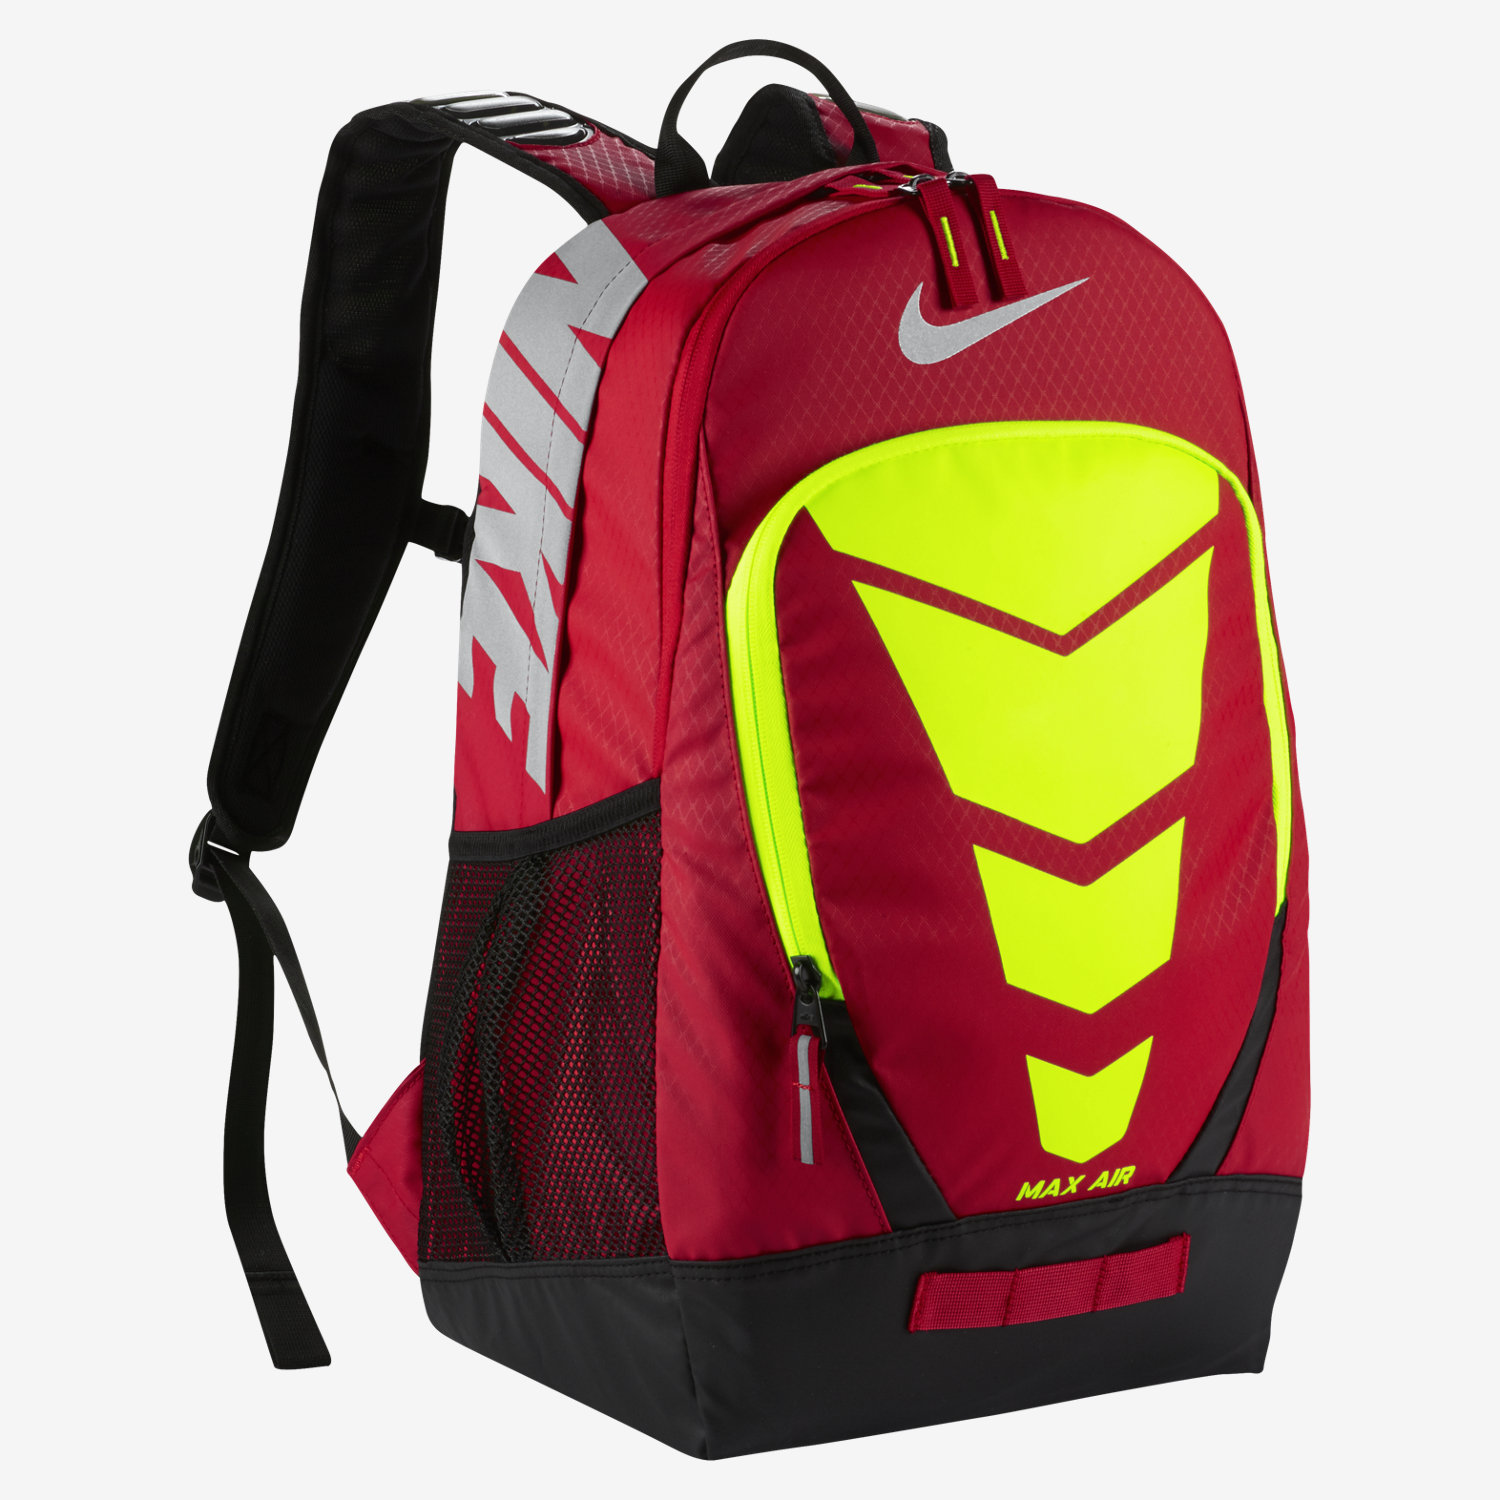 Nike Max Air Backpack Yellow And Red | Heavenly Nightlife